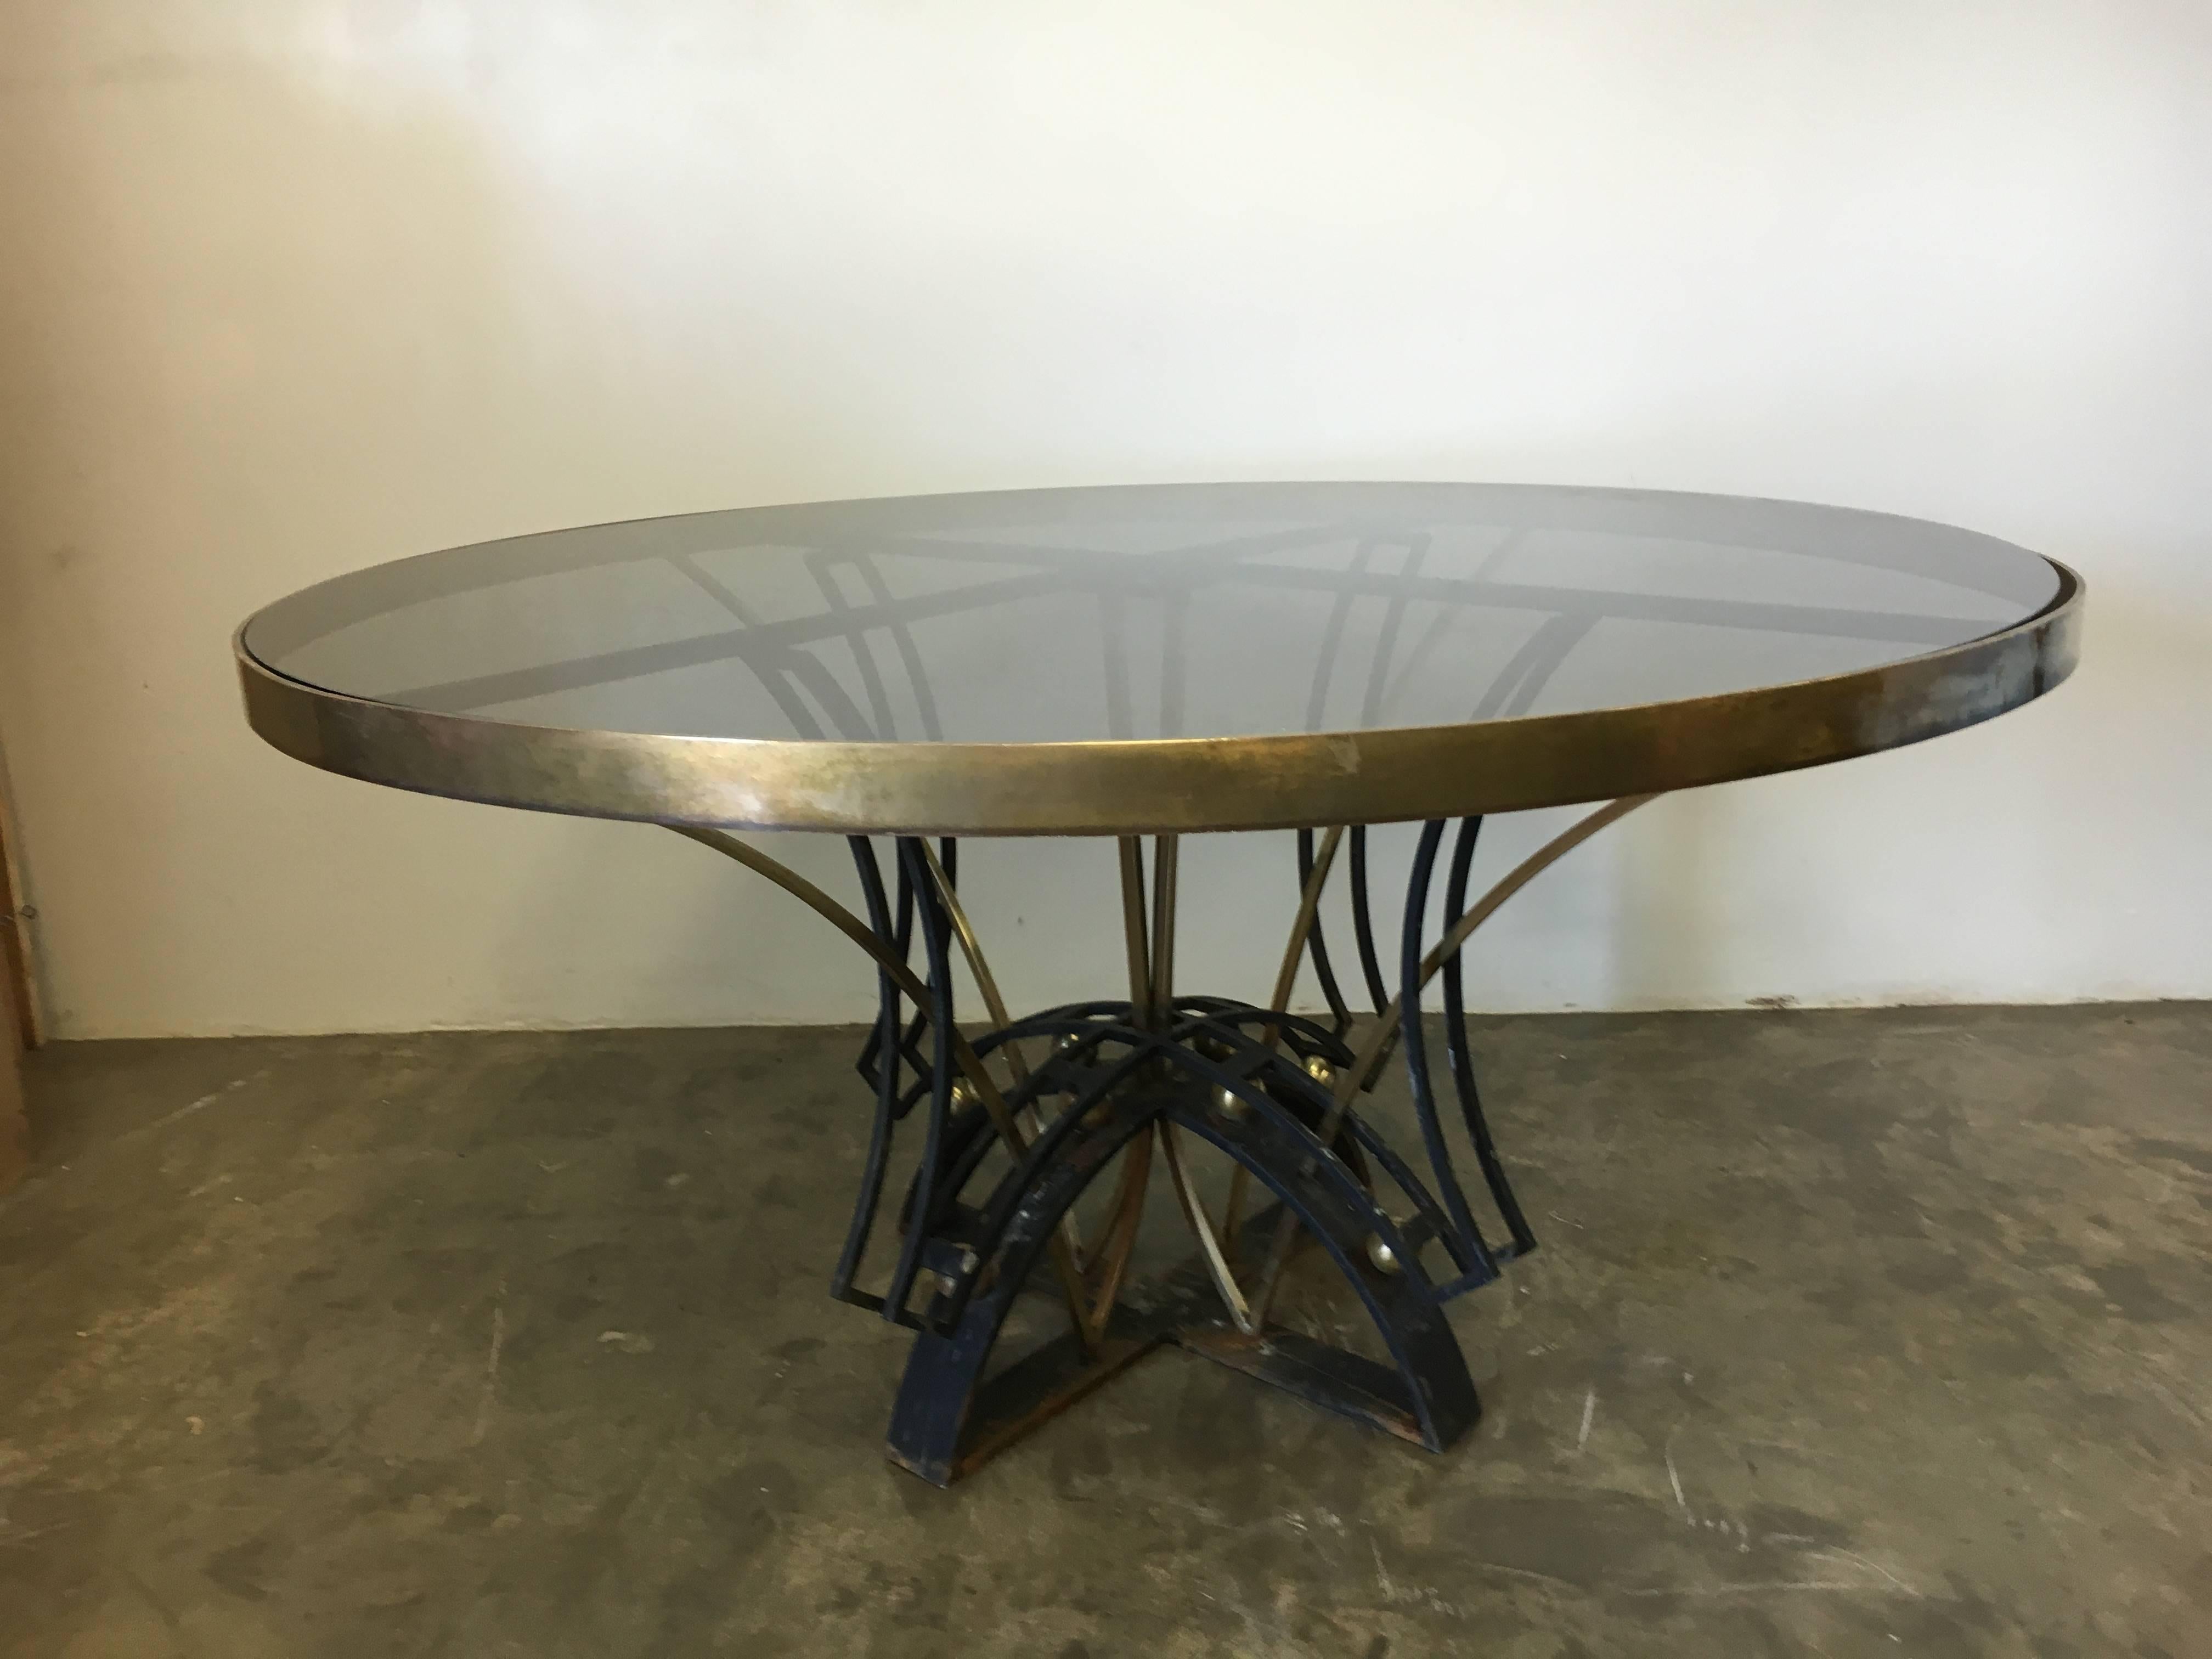 Stunning round dining table in wrought iron and solid brass accents.
Designed by Arturo Pani.
Executed in the workshop 